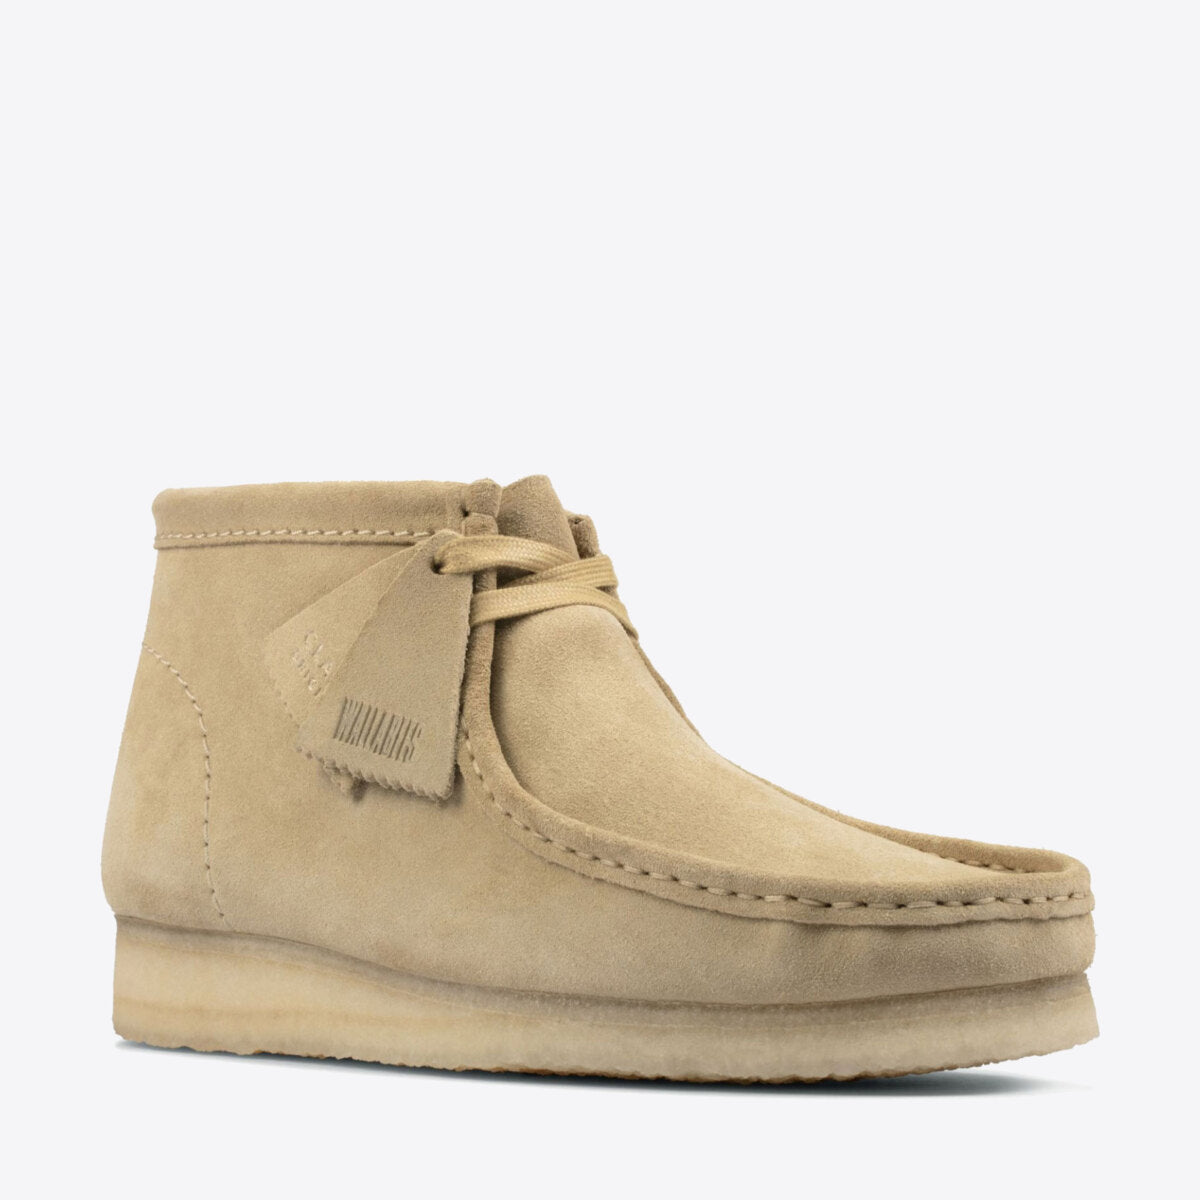 CLARKS Wallabee Boot Suede Maple - Image 2